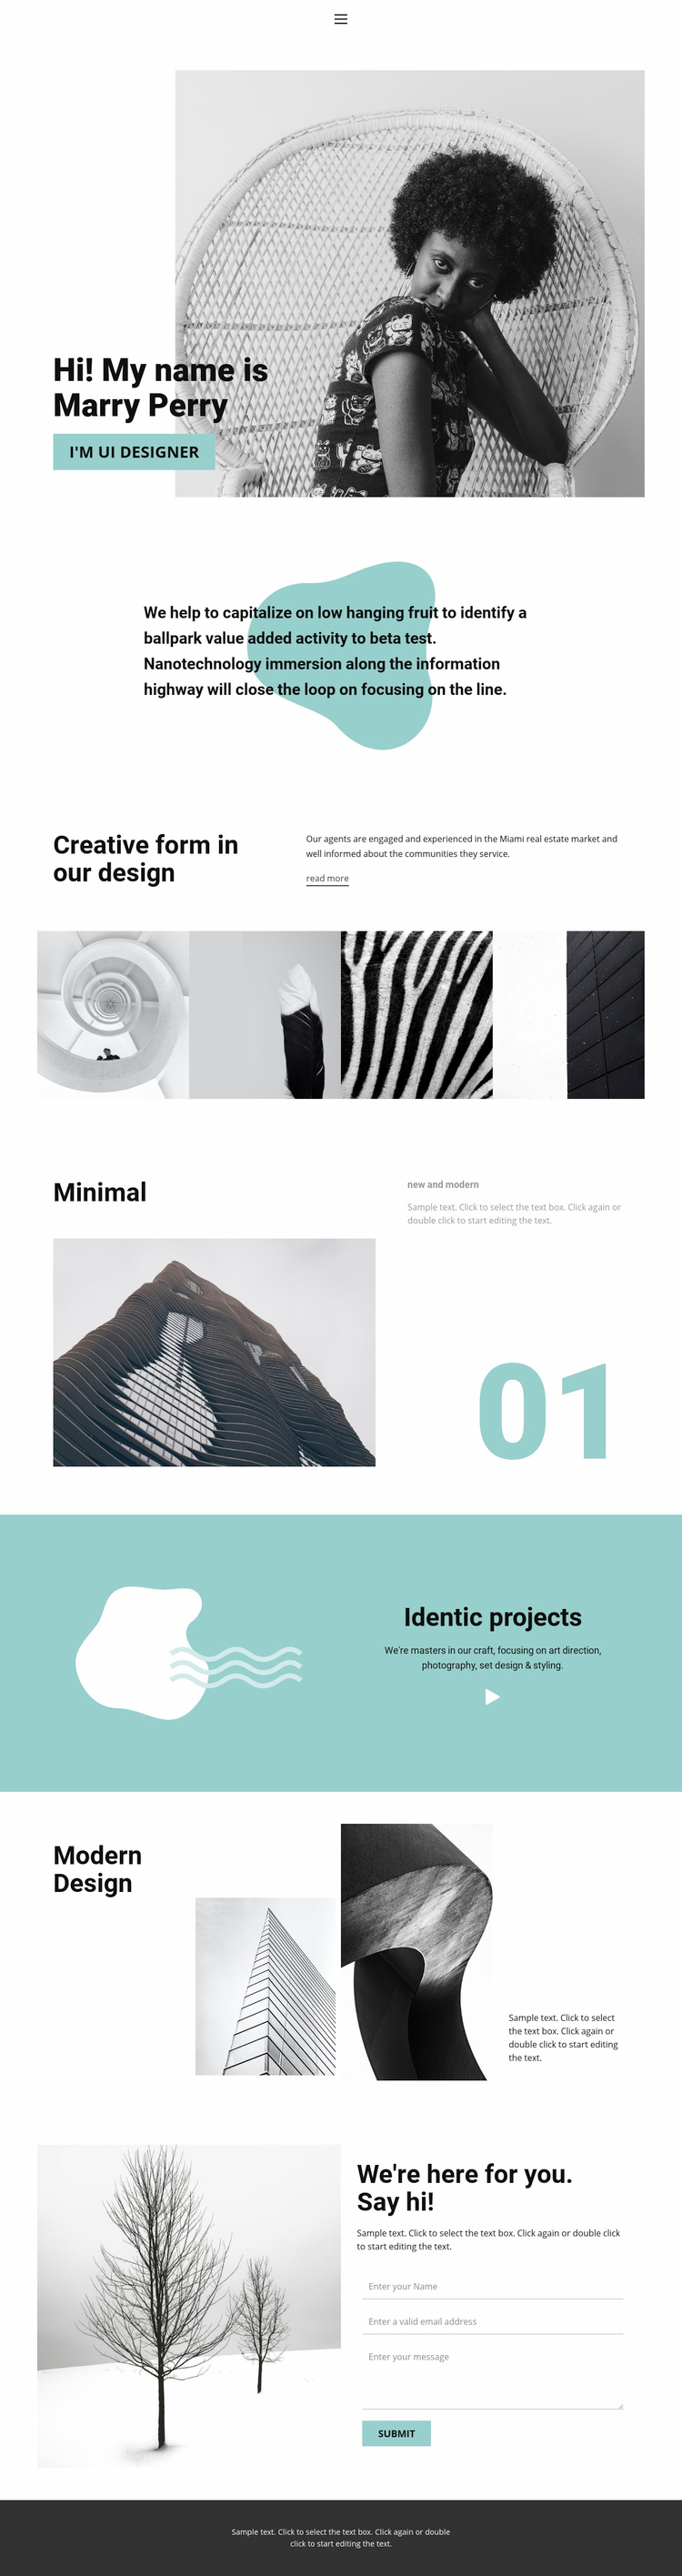 Web design from our studio Squarespace Template Alternative